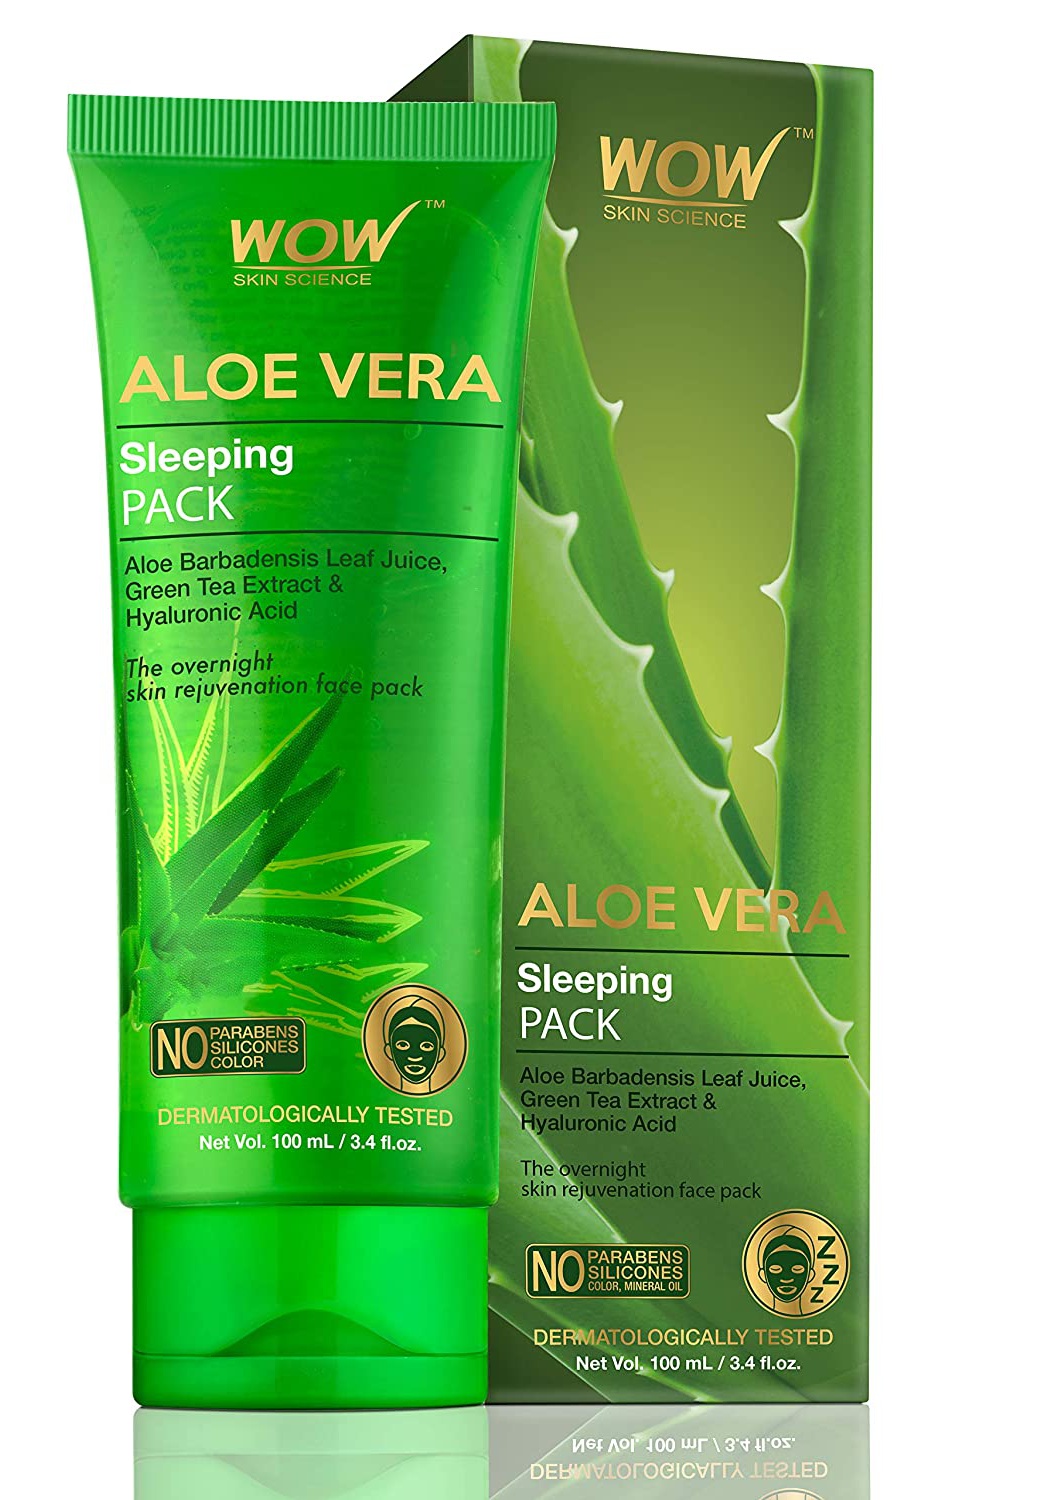 WOW skin science Aloe Vera With Green Tea Extract And Hyaluronic Acid Sleeping Pack